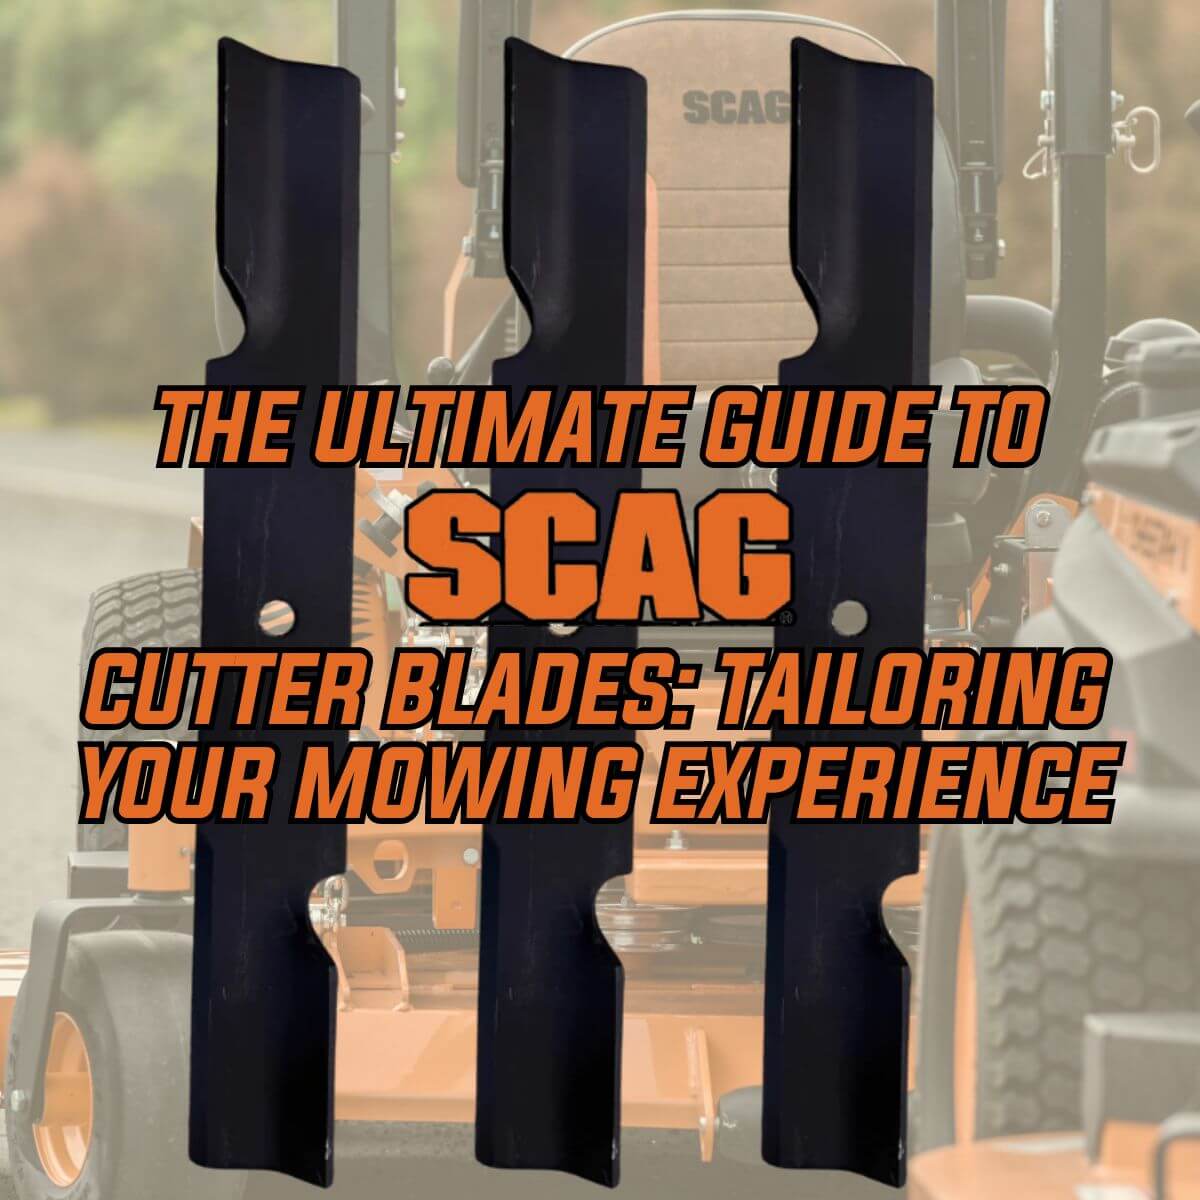 The Ultimate Guide to Scag Cutter Blades: Tailoring Your Mowing Experience